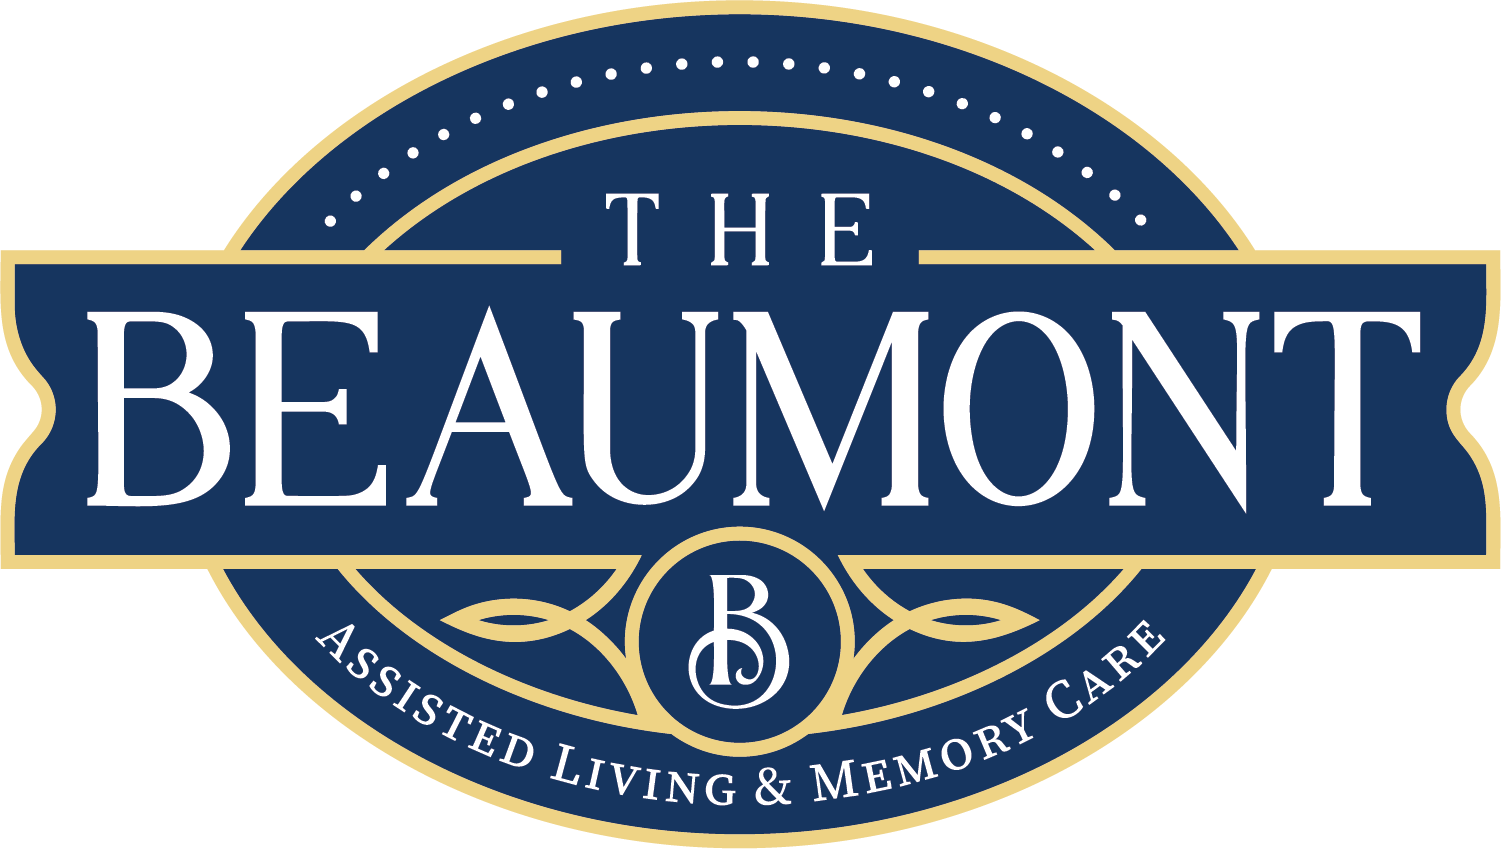 The Beaumont Assisted Living